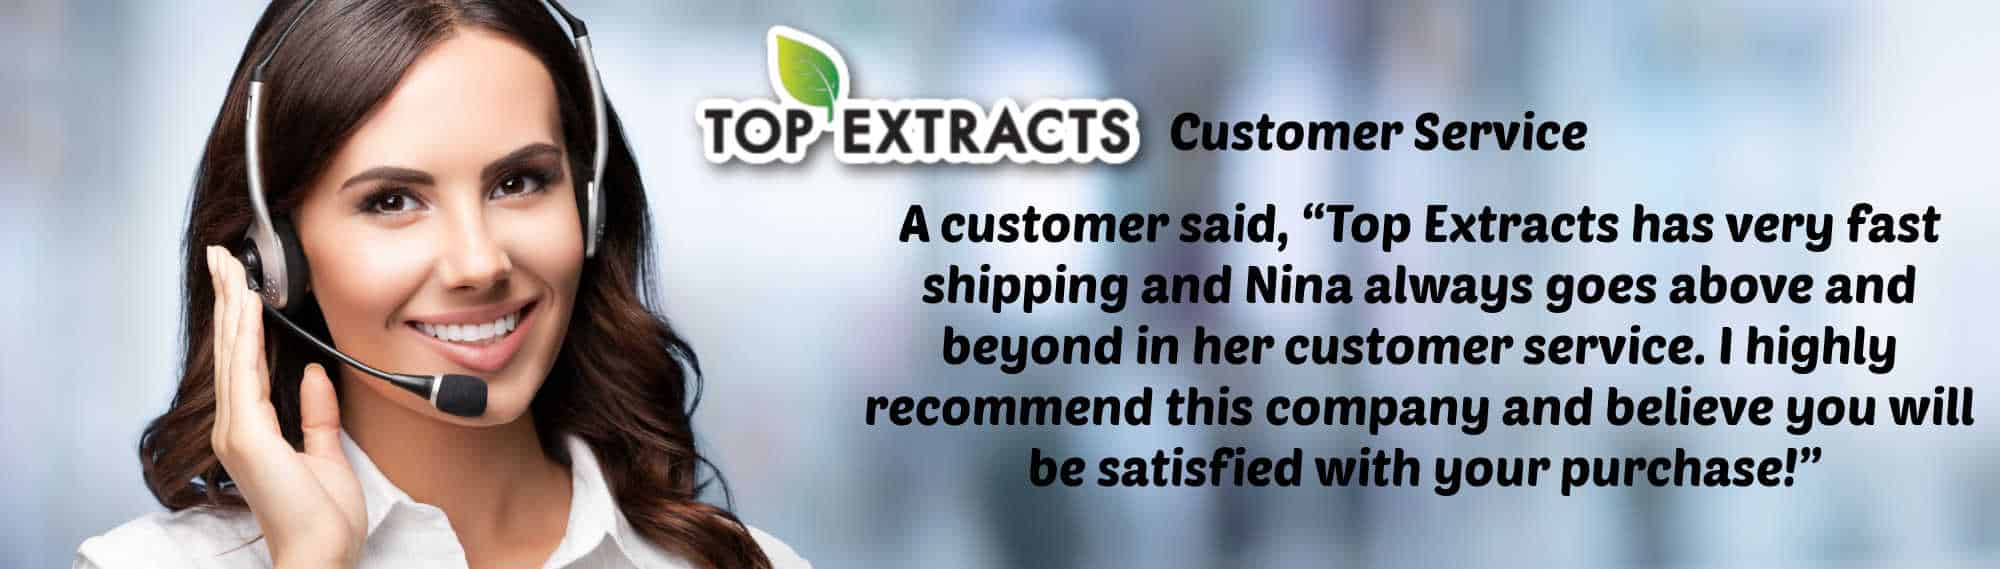 image of top extracts customer service